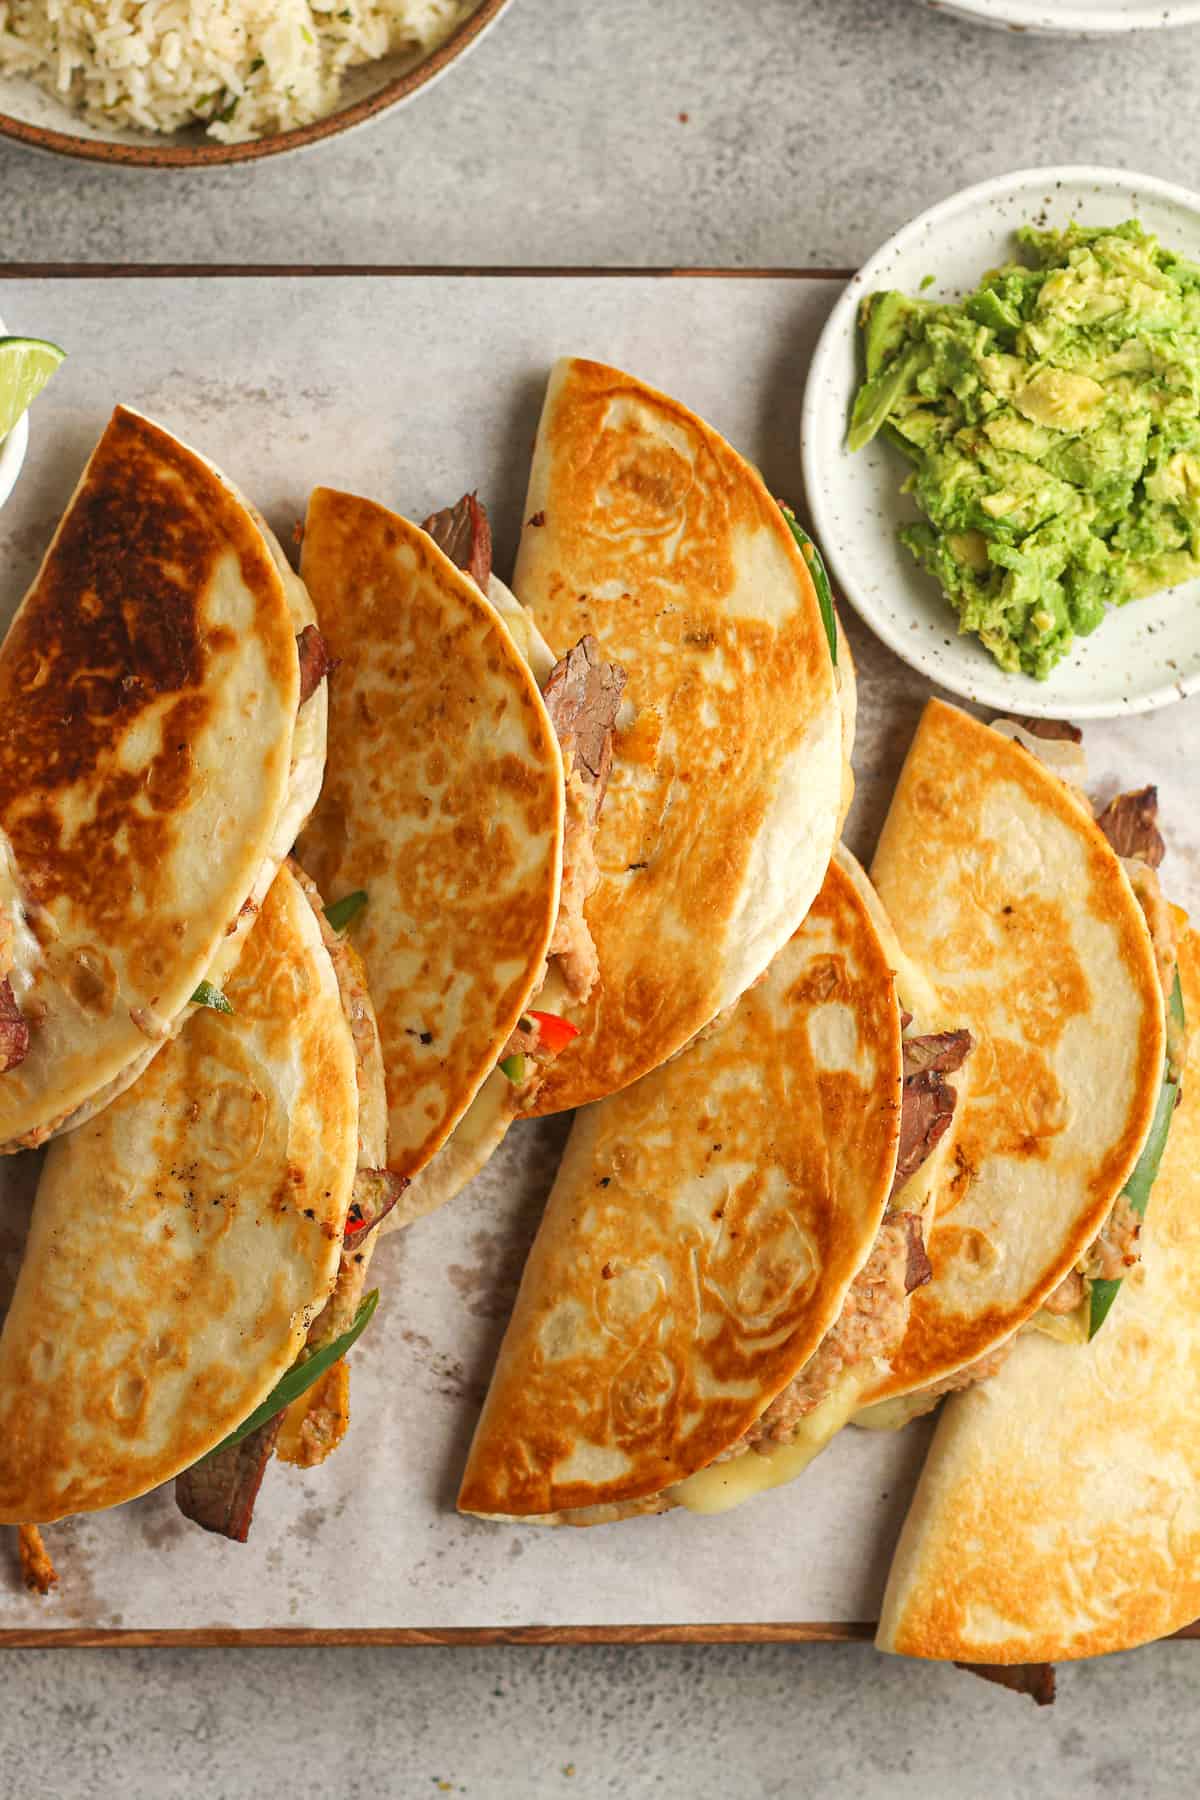 A board of just made carne asada quesadillas, with a plate of guacamole.